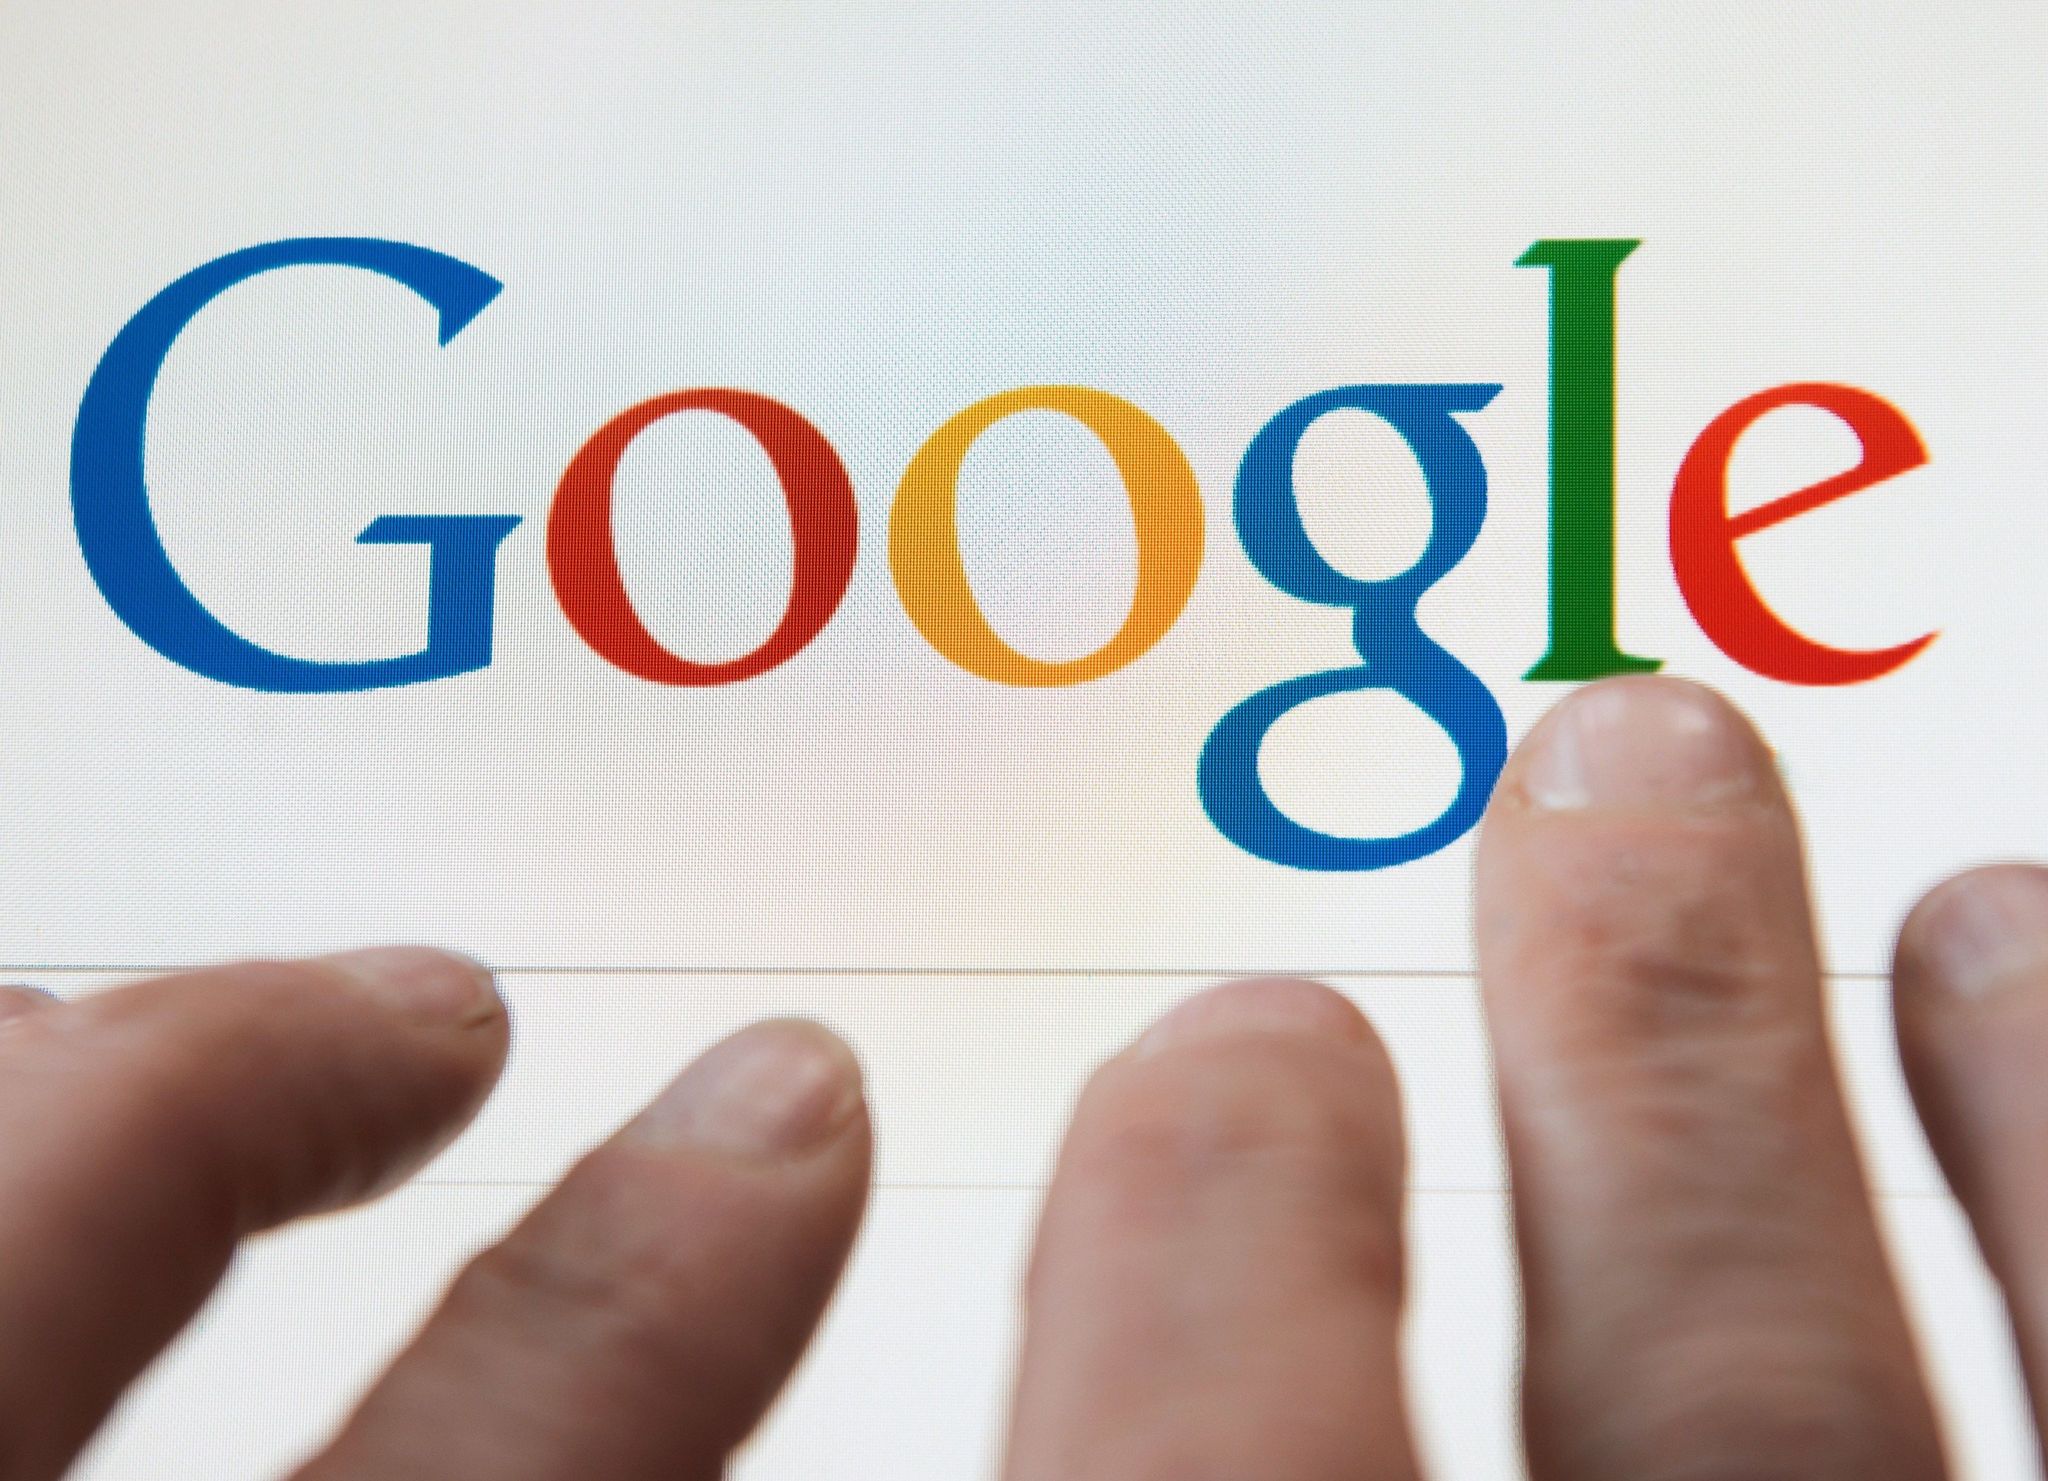 Google has changed its logo and we don't really like it